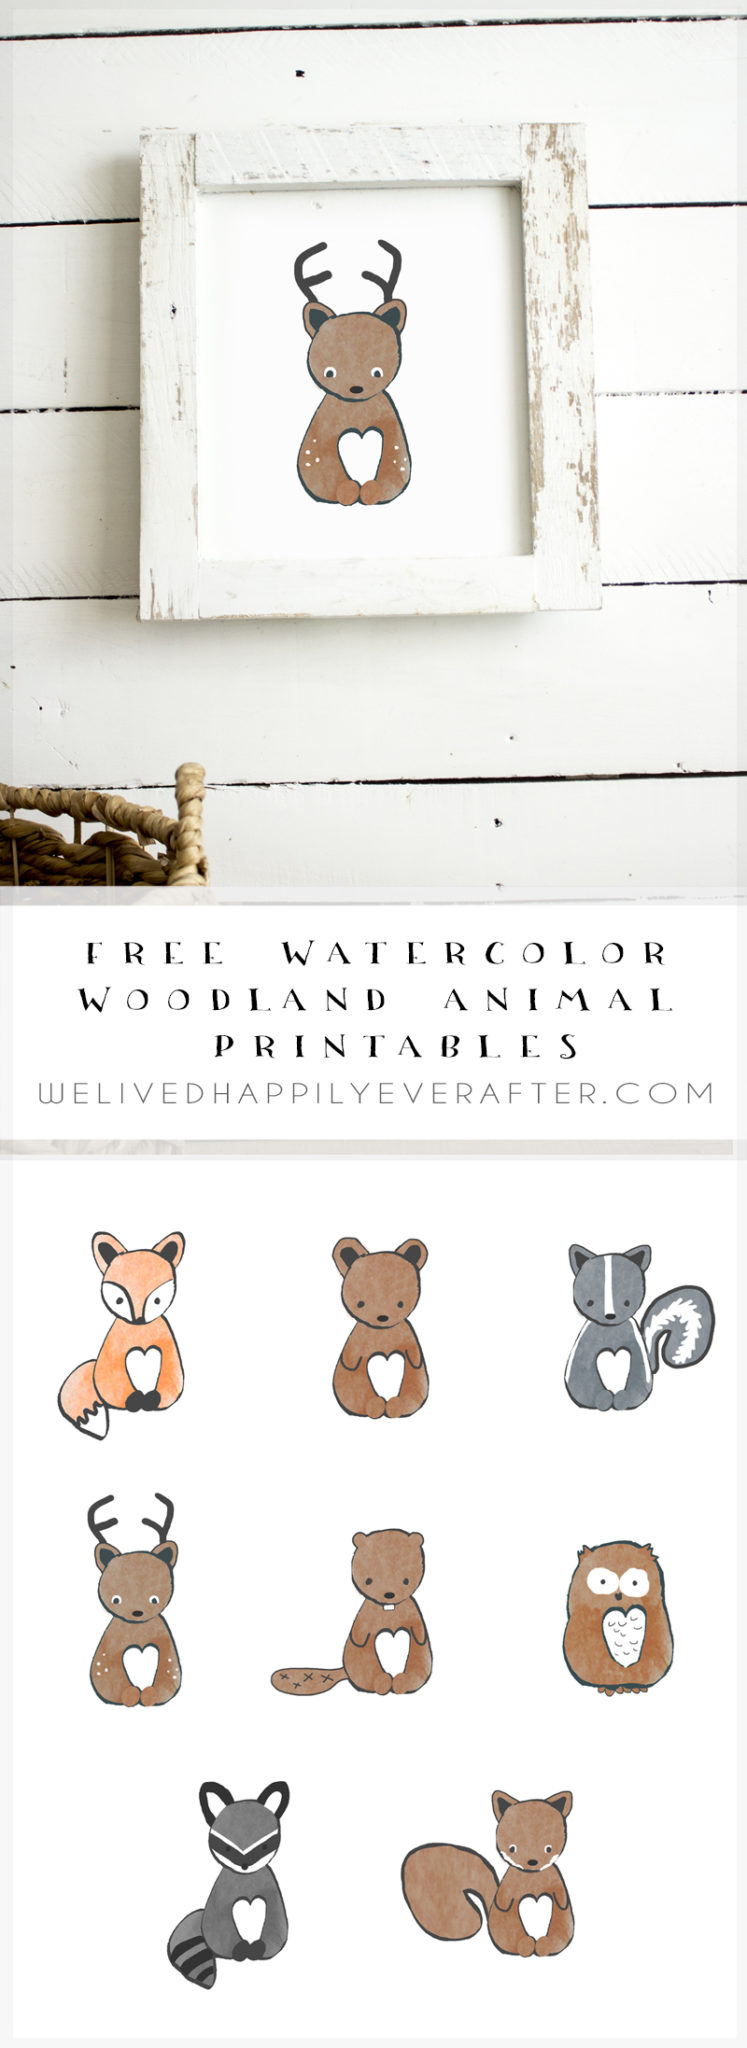 Free Watercolor Forest Woodland Animal Nursery Prints | We Lived in Free Nursery Printables Boy